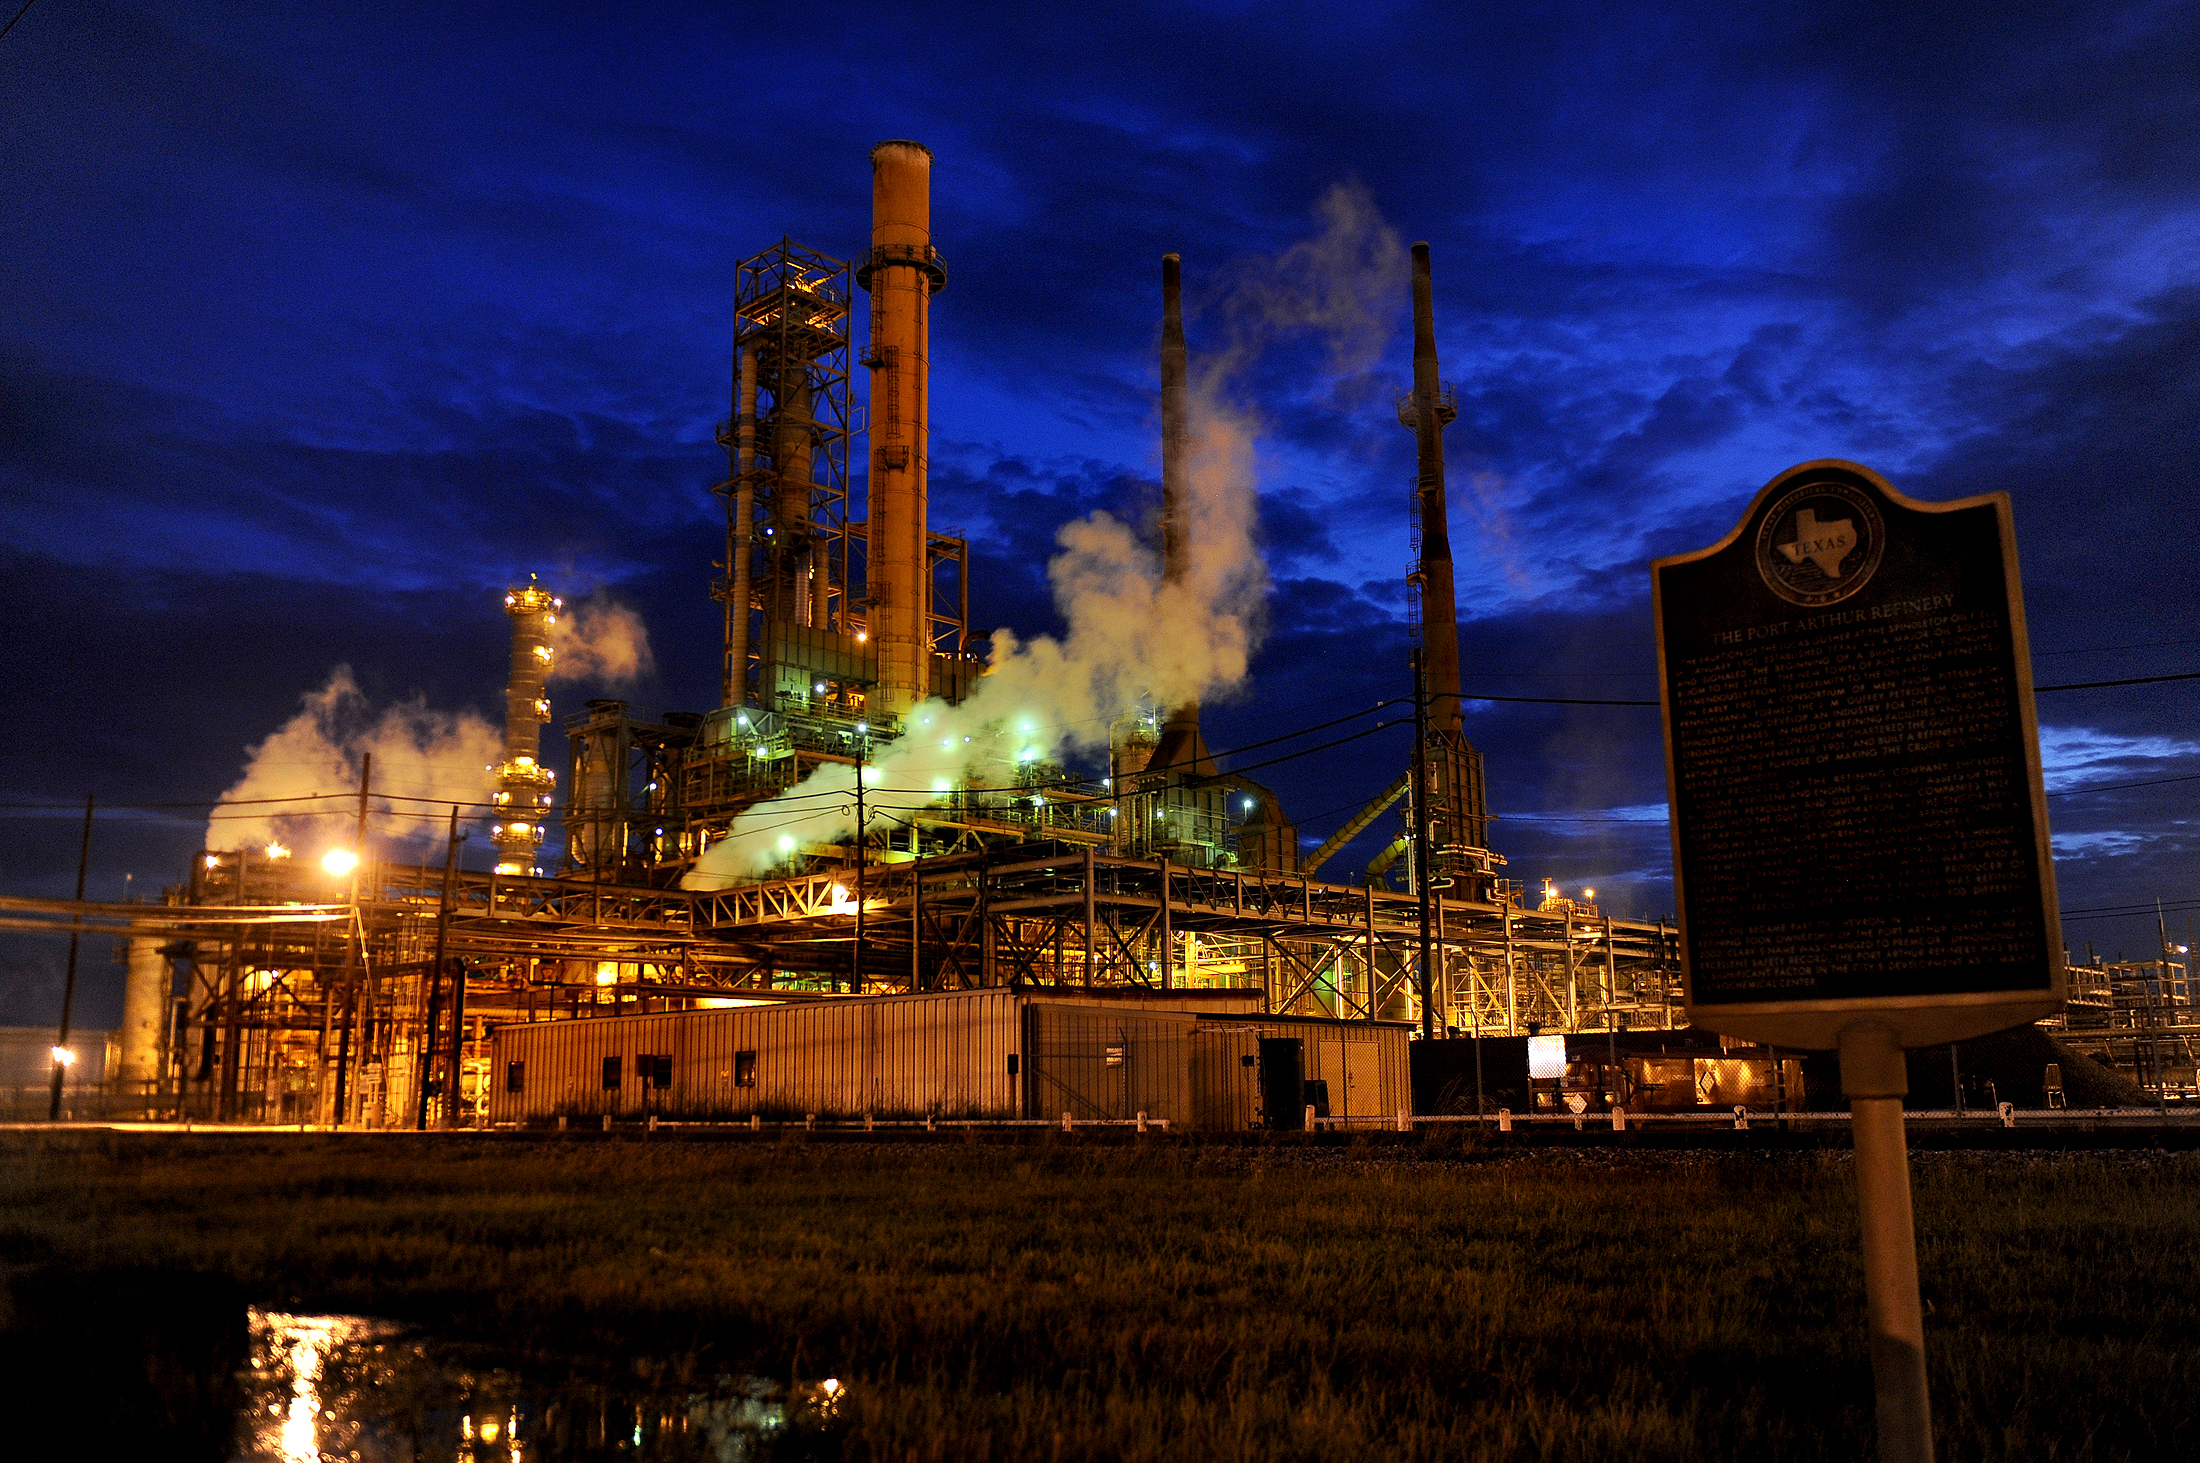 A refinery at night.